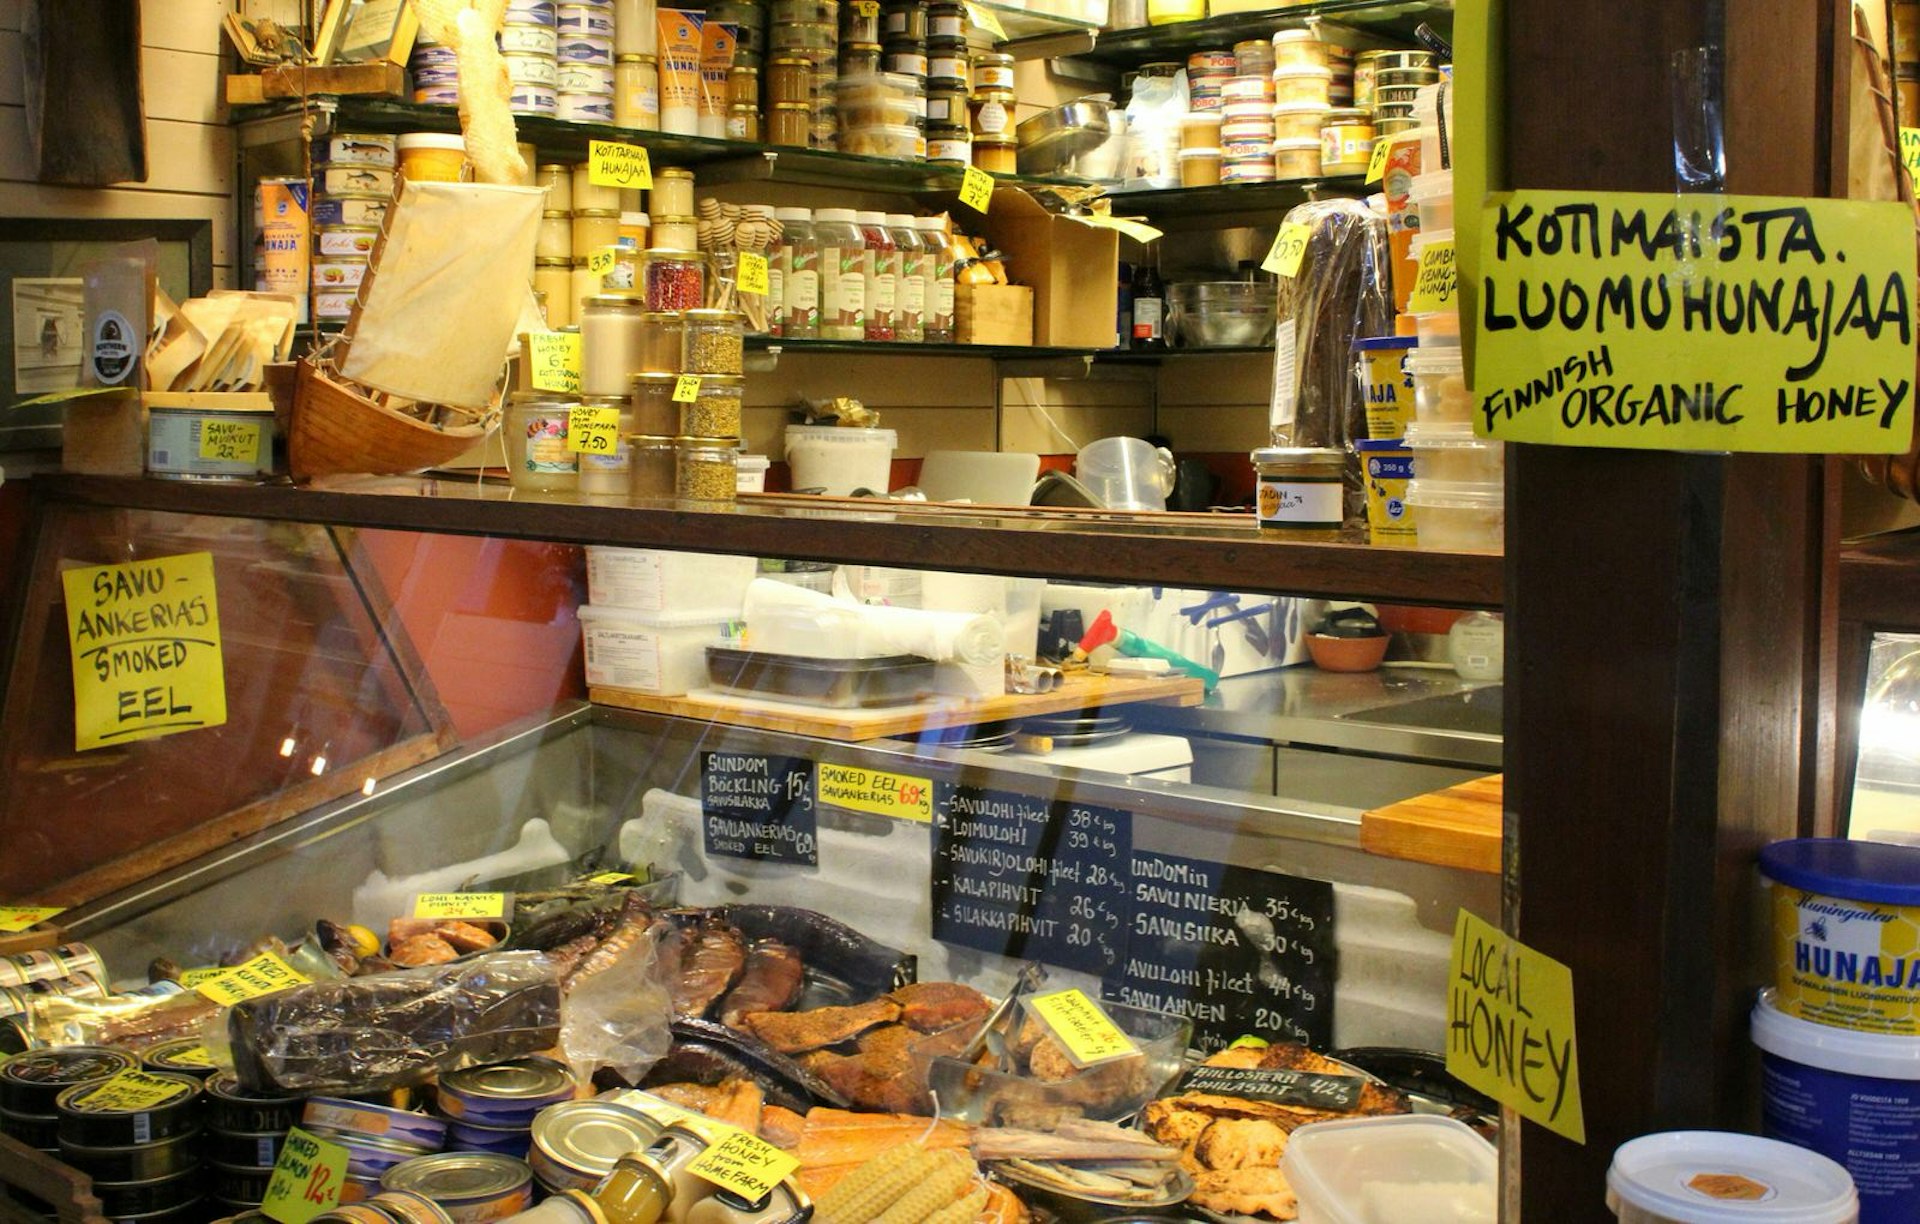 A display of local Finnish products such as honey and dried fish for sale at Kauppatori (Old Market Hall)